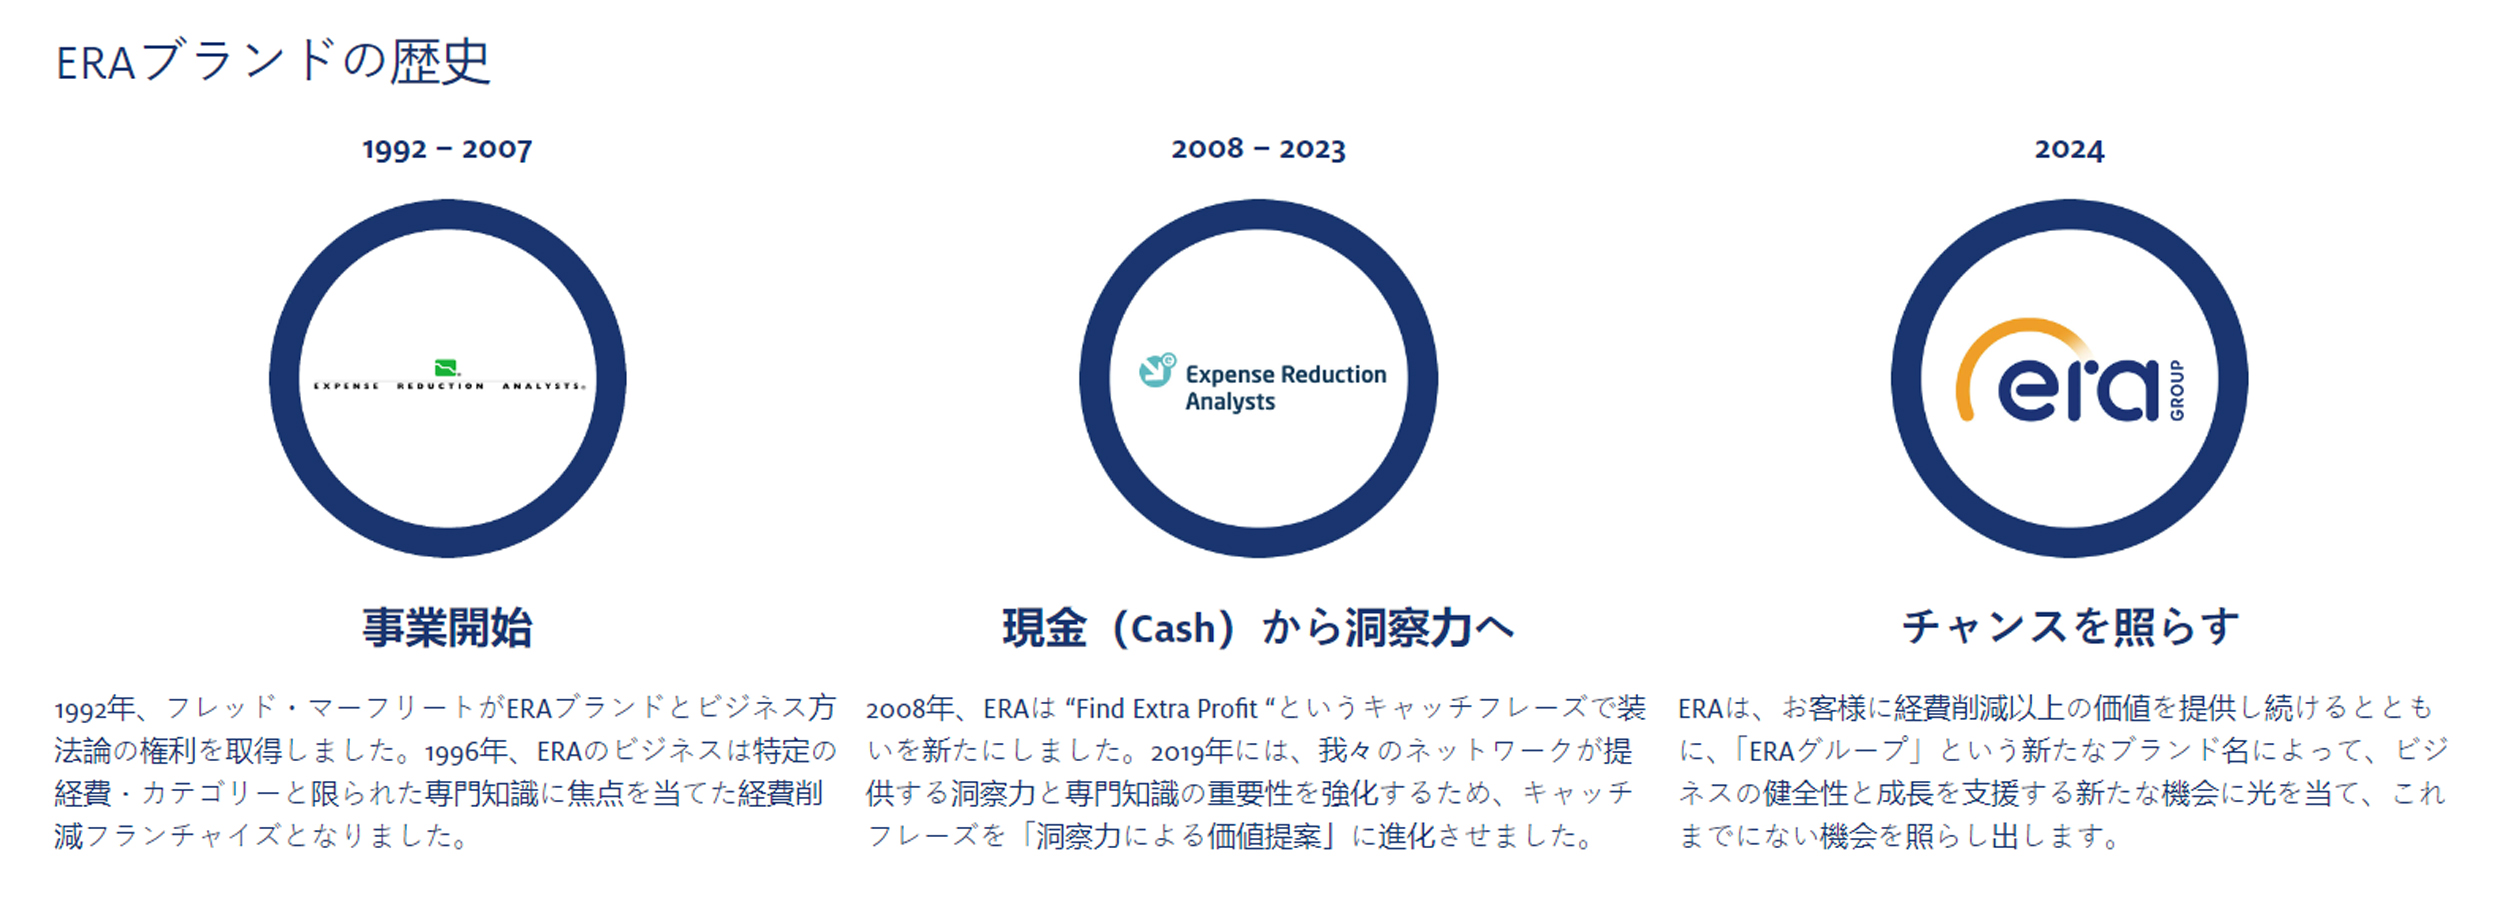 Our Brand Journey Japan